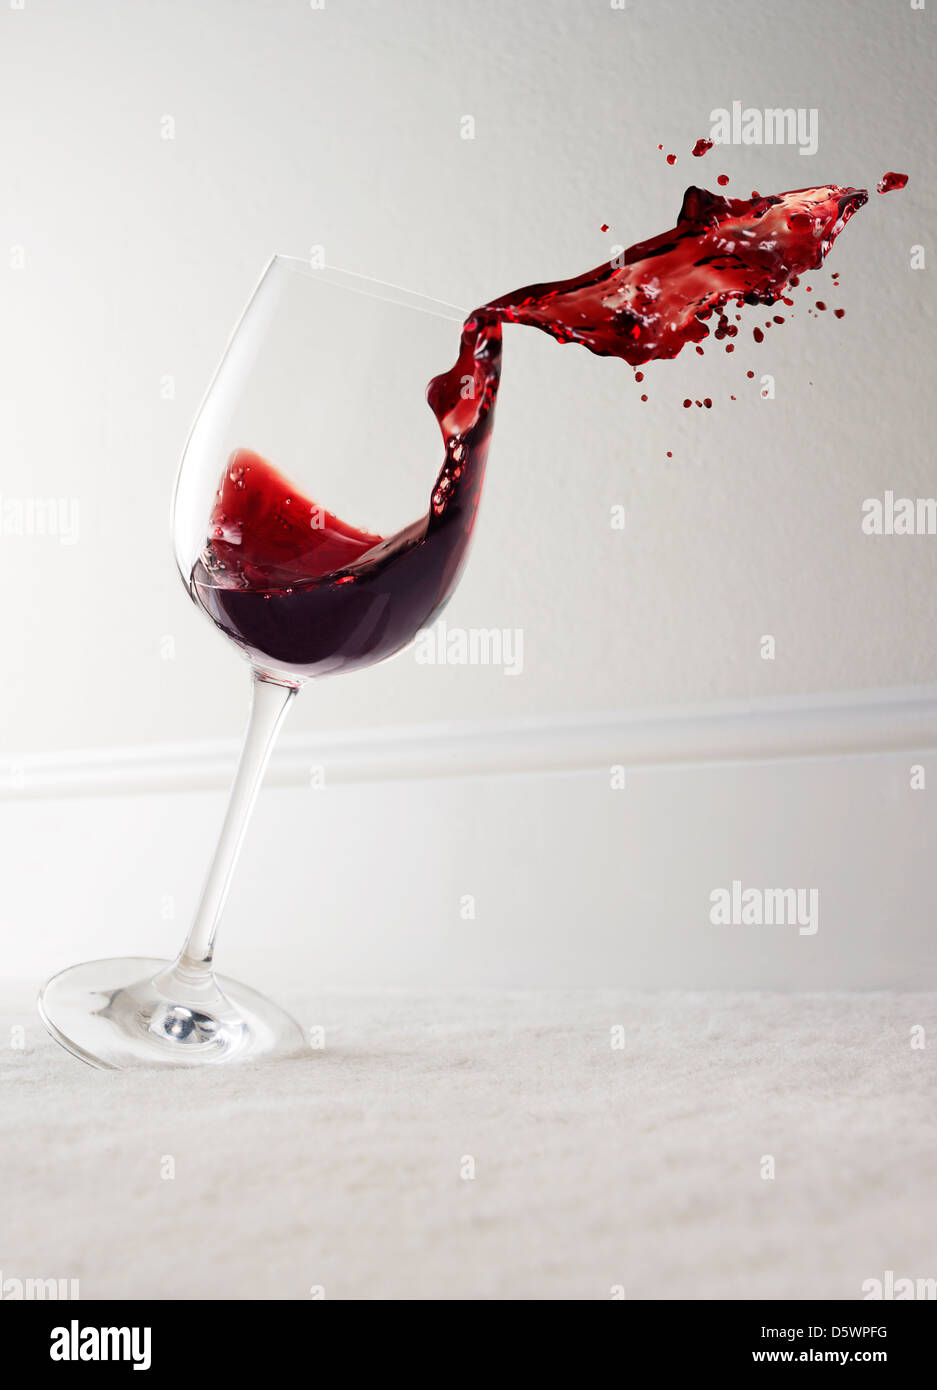 Glass of red wine spilling Stock Photo